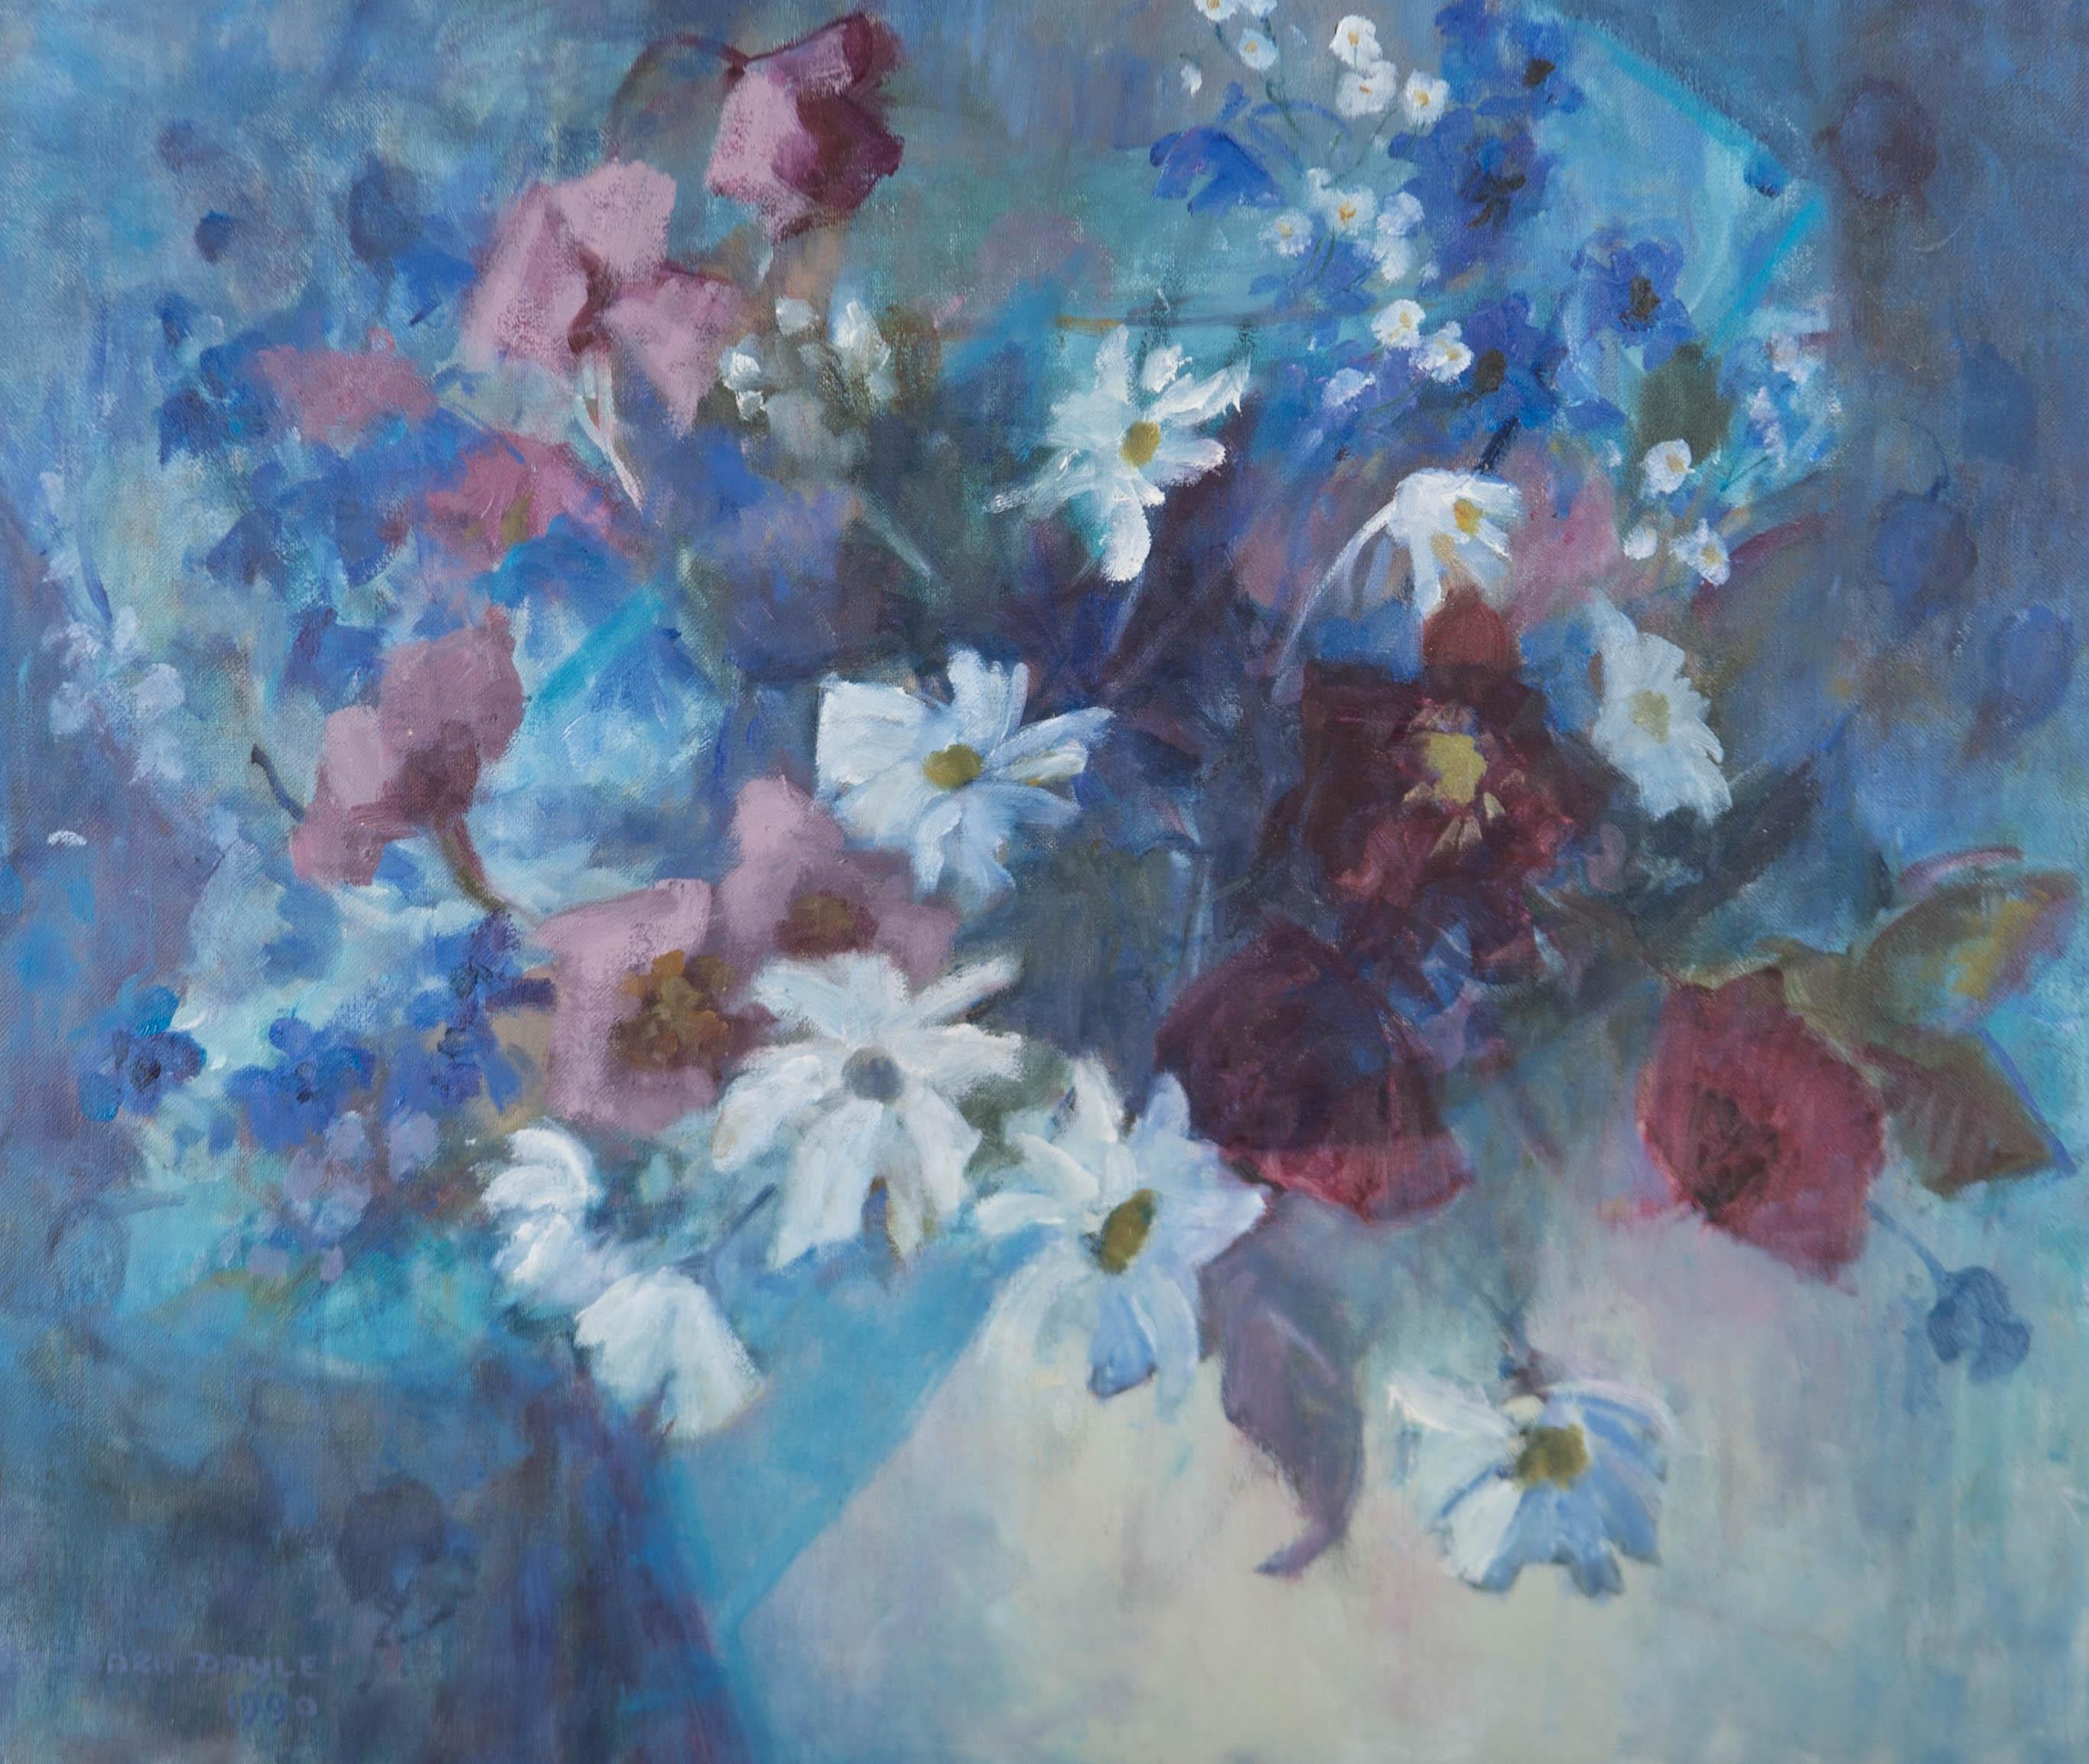 An expressive oil painting by the artist Barbara Doyle, depicting a floral still life in blue. Signed and dated to the lower left-hand corner. There is a 'Mall Galleries' label on the reverse inscribed with the title. Well-presented in a distressed,